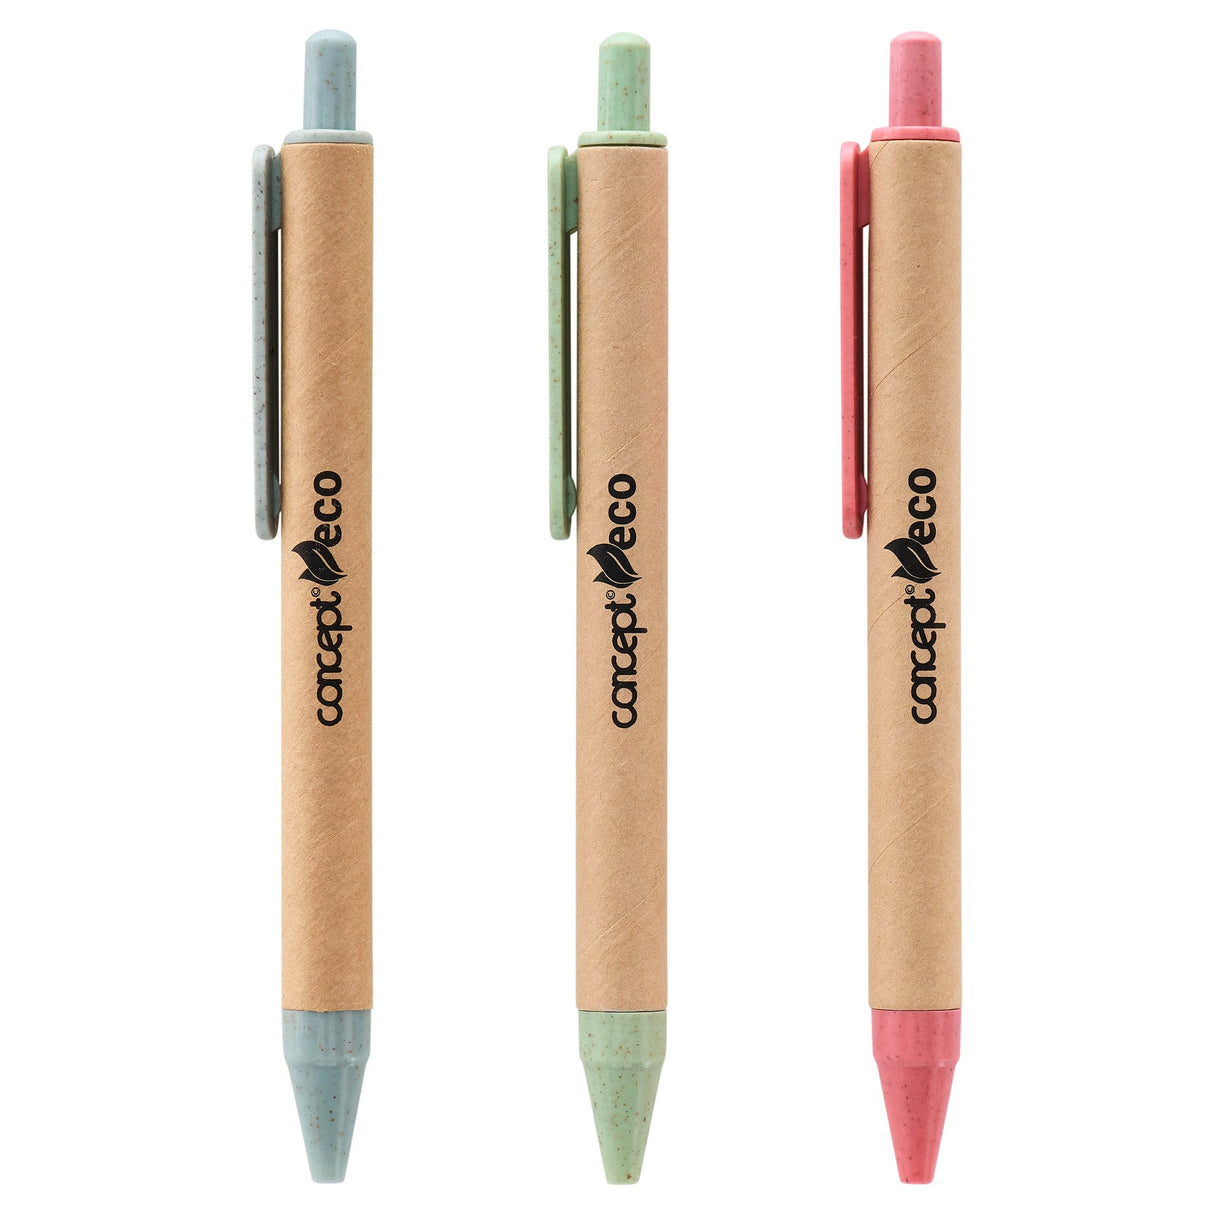 Concept Green Retractable Ballpoint Pens - Pack of 3 | Stationery Shop UK